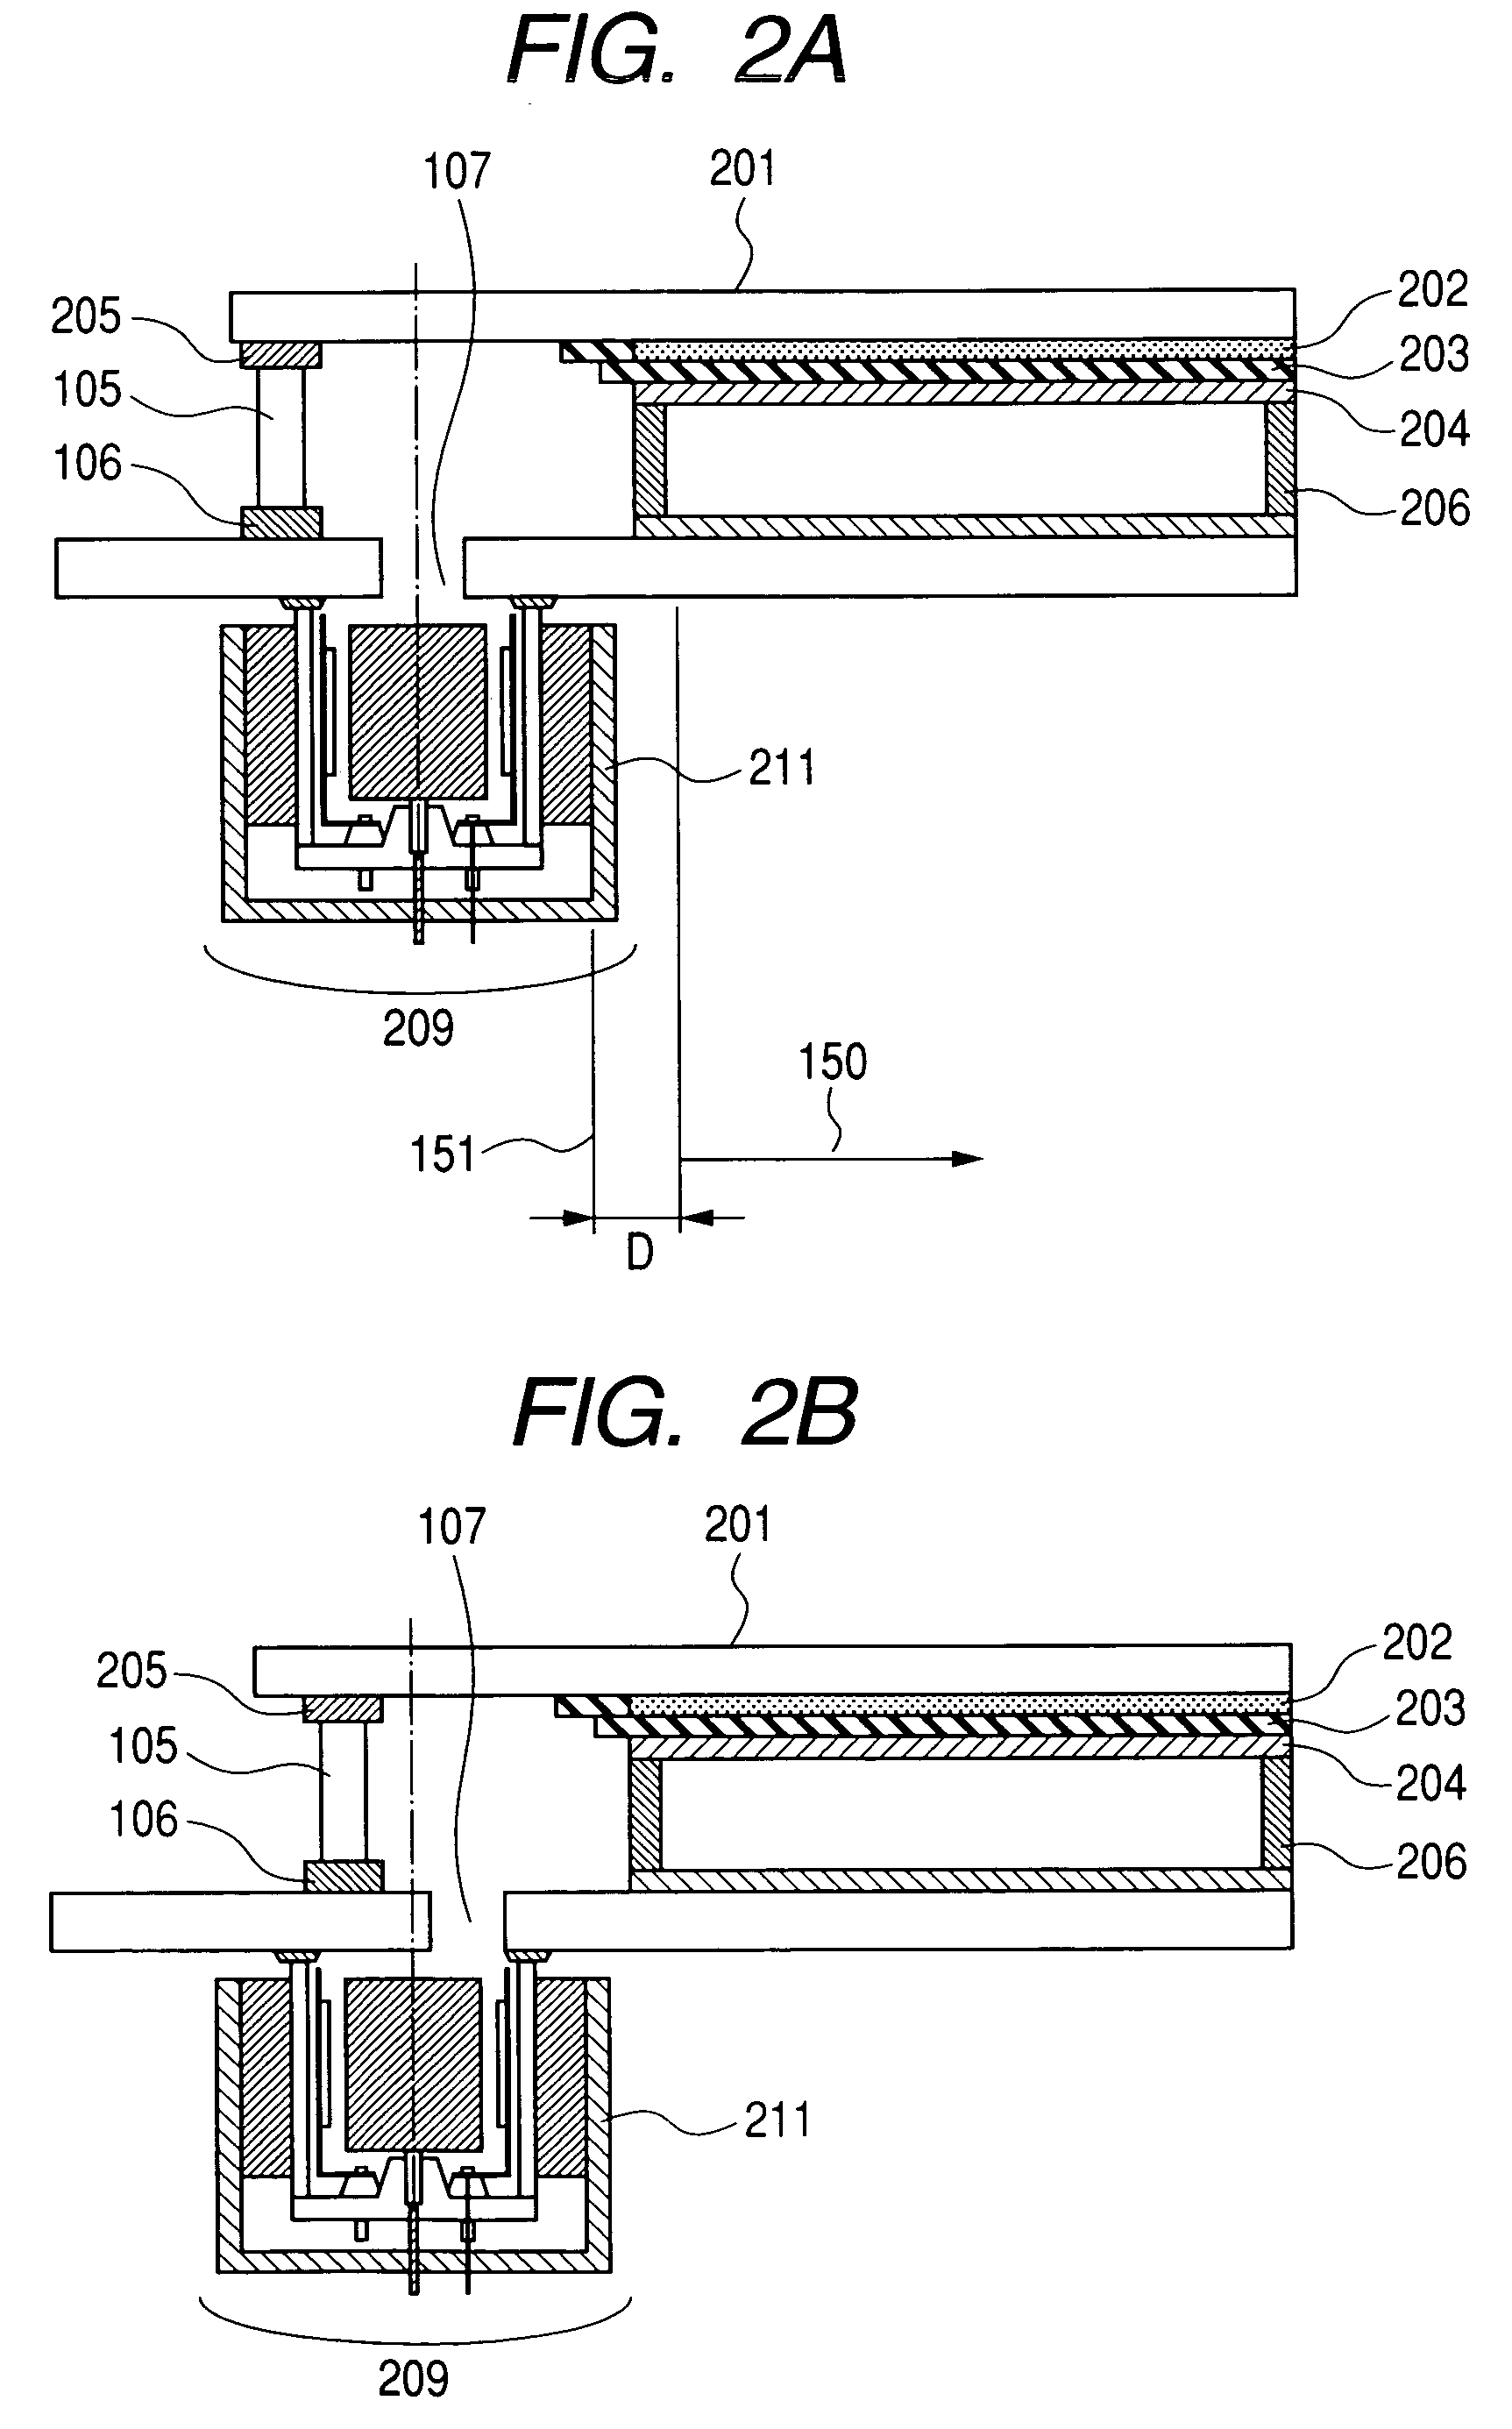 Image display apparatus with particular ion pump location